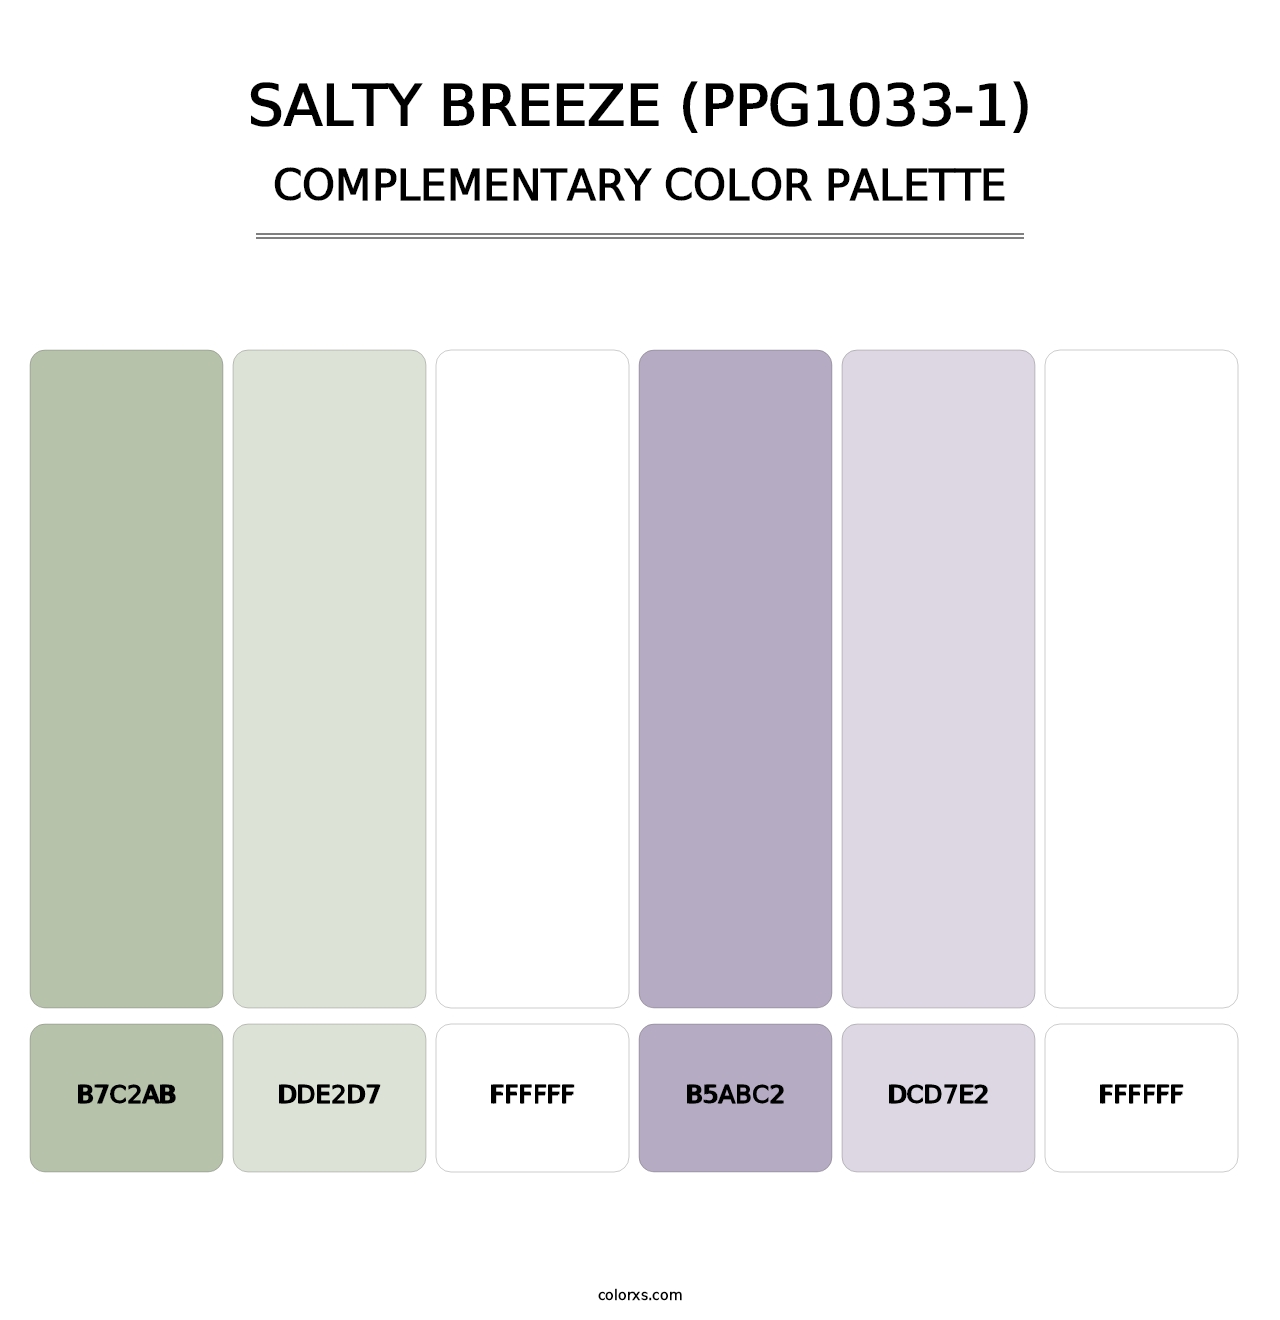 Salty Breeze (PPG1033-1) - Complementary Color Palette